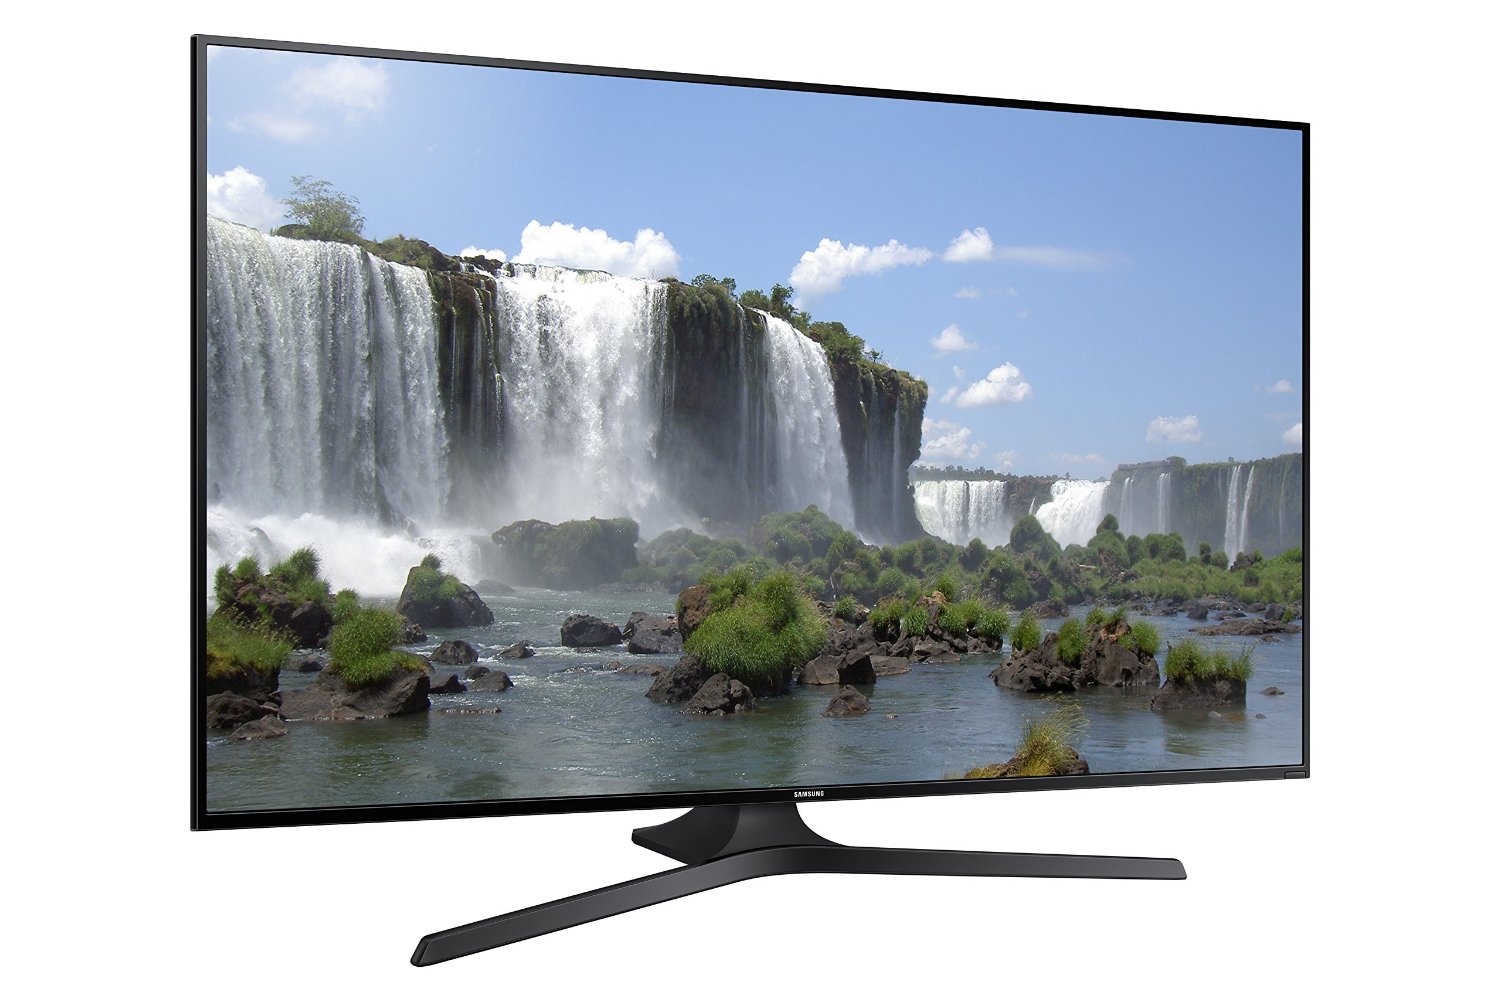 Save 42% on the Samsung 50-Inch 1080p Smart LED TV